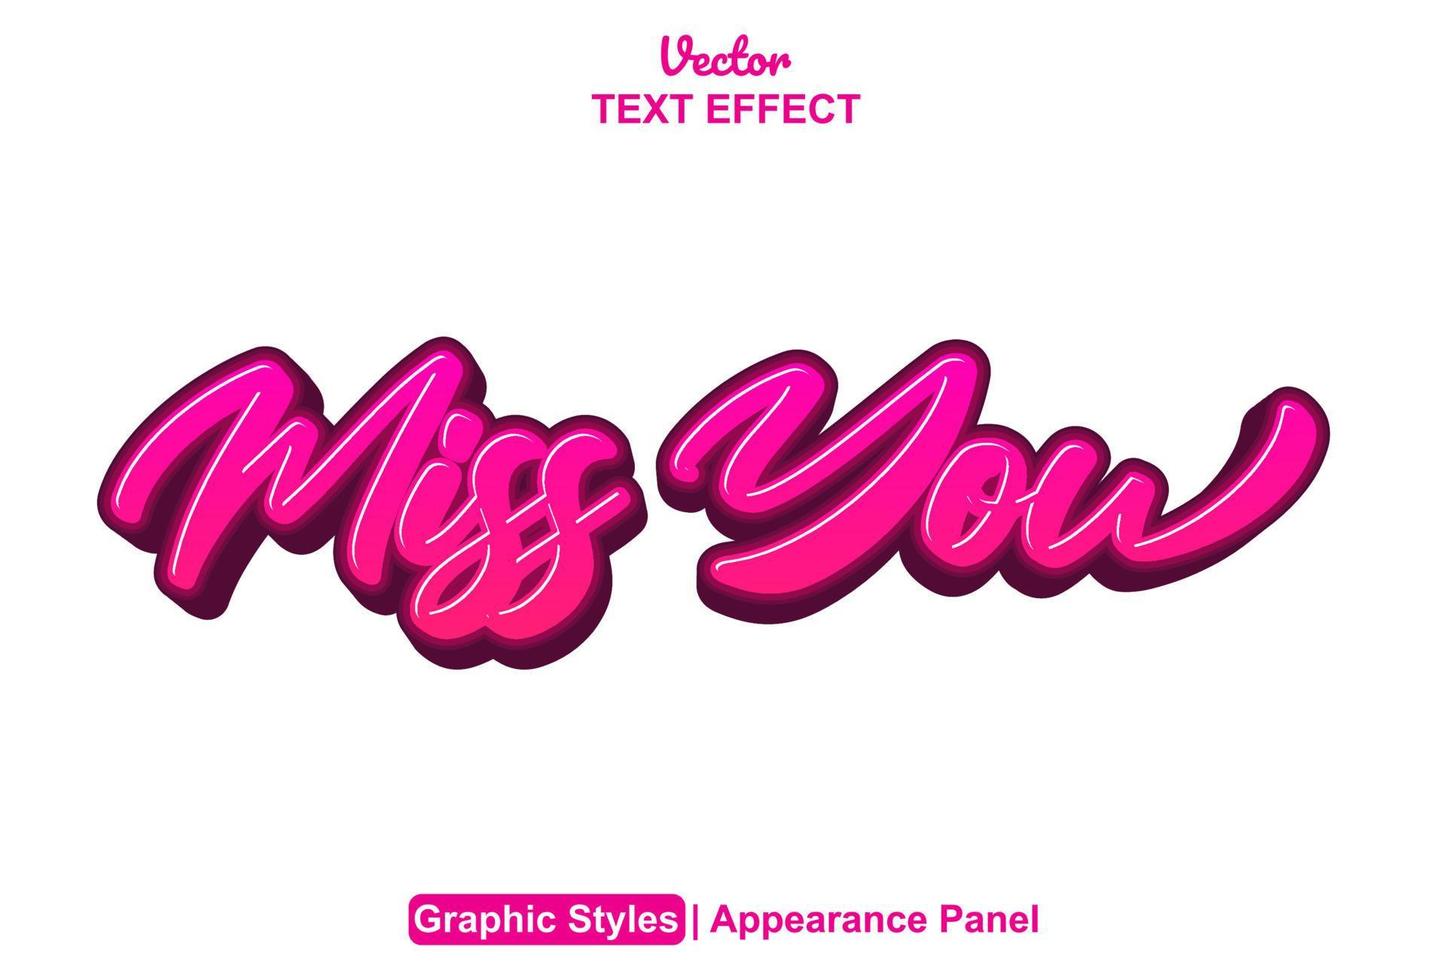 miss you text effect with graphic style and editable. vector